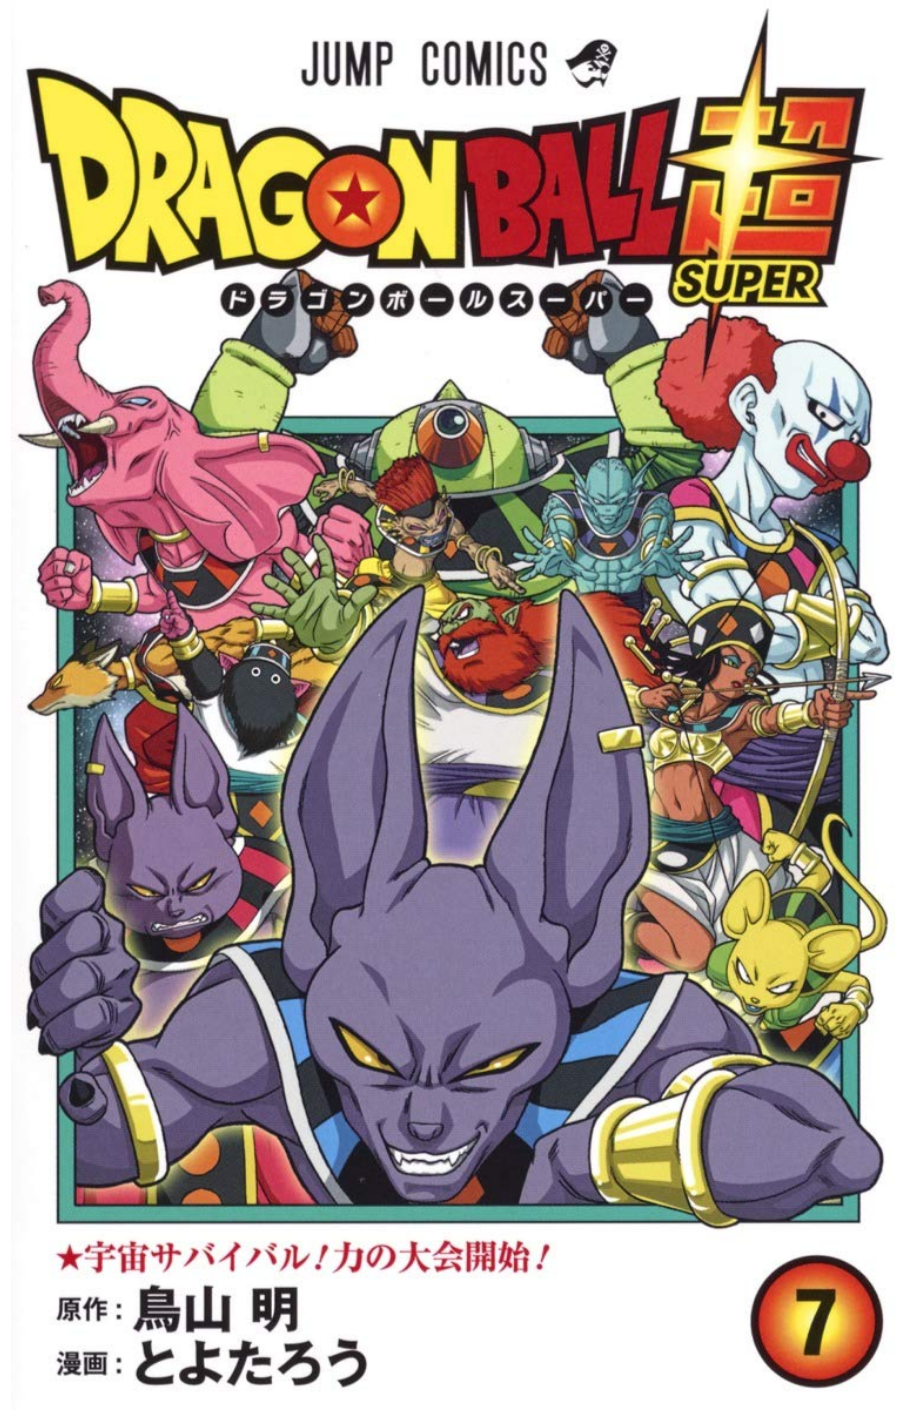 Universe Survival! The Tournament of Power Begins ...